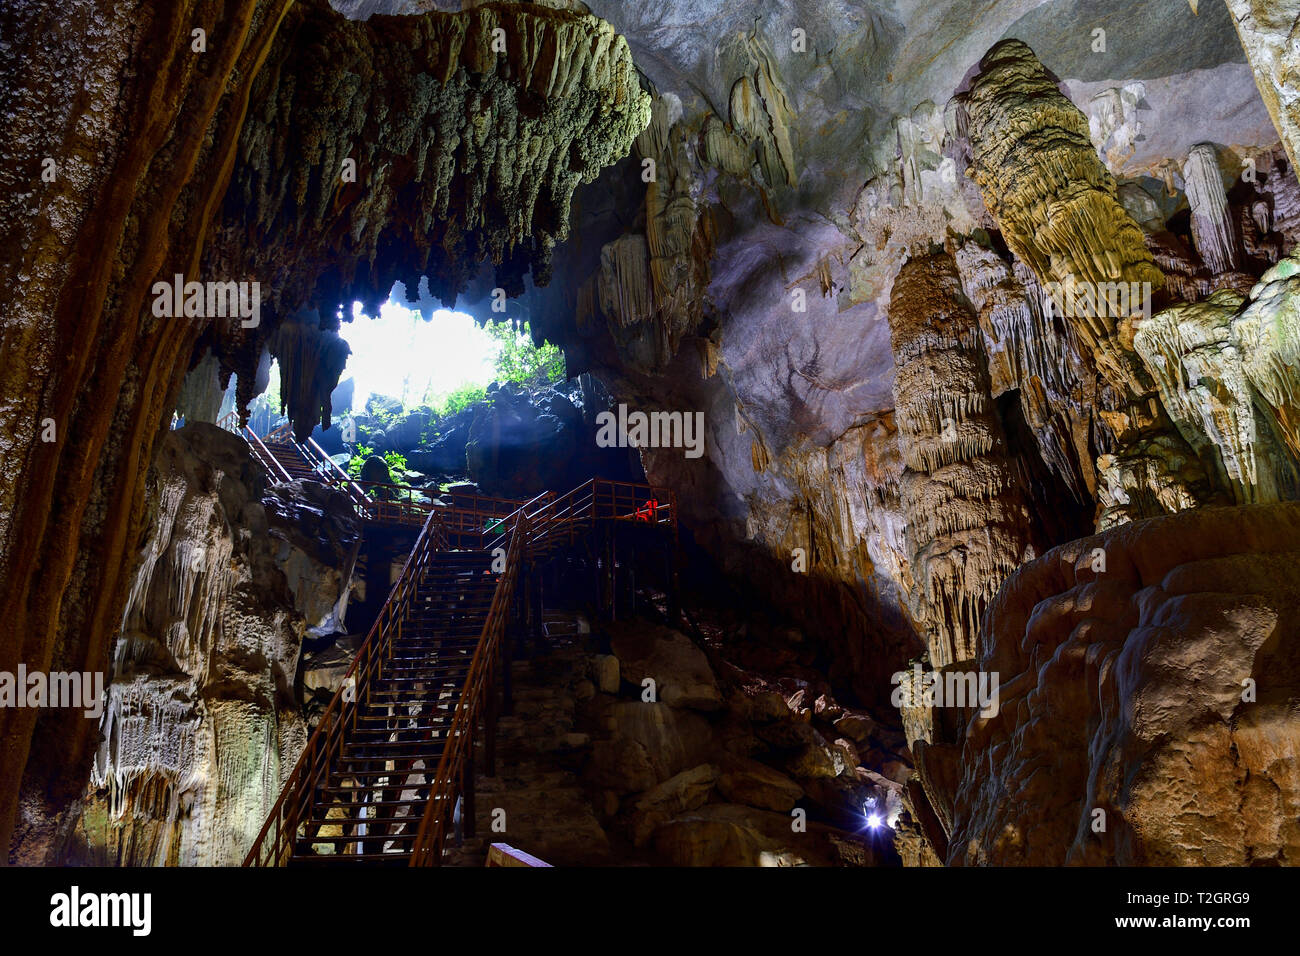 Amazing geological forms in Tien Son near Phong Nha, Vietnam. Limestone cave full of stalactites and stalagmites. Stock Photo